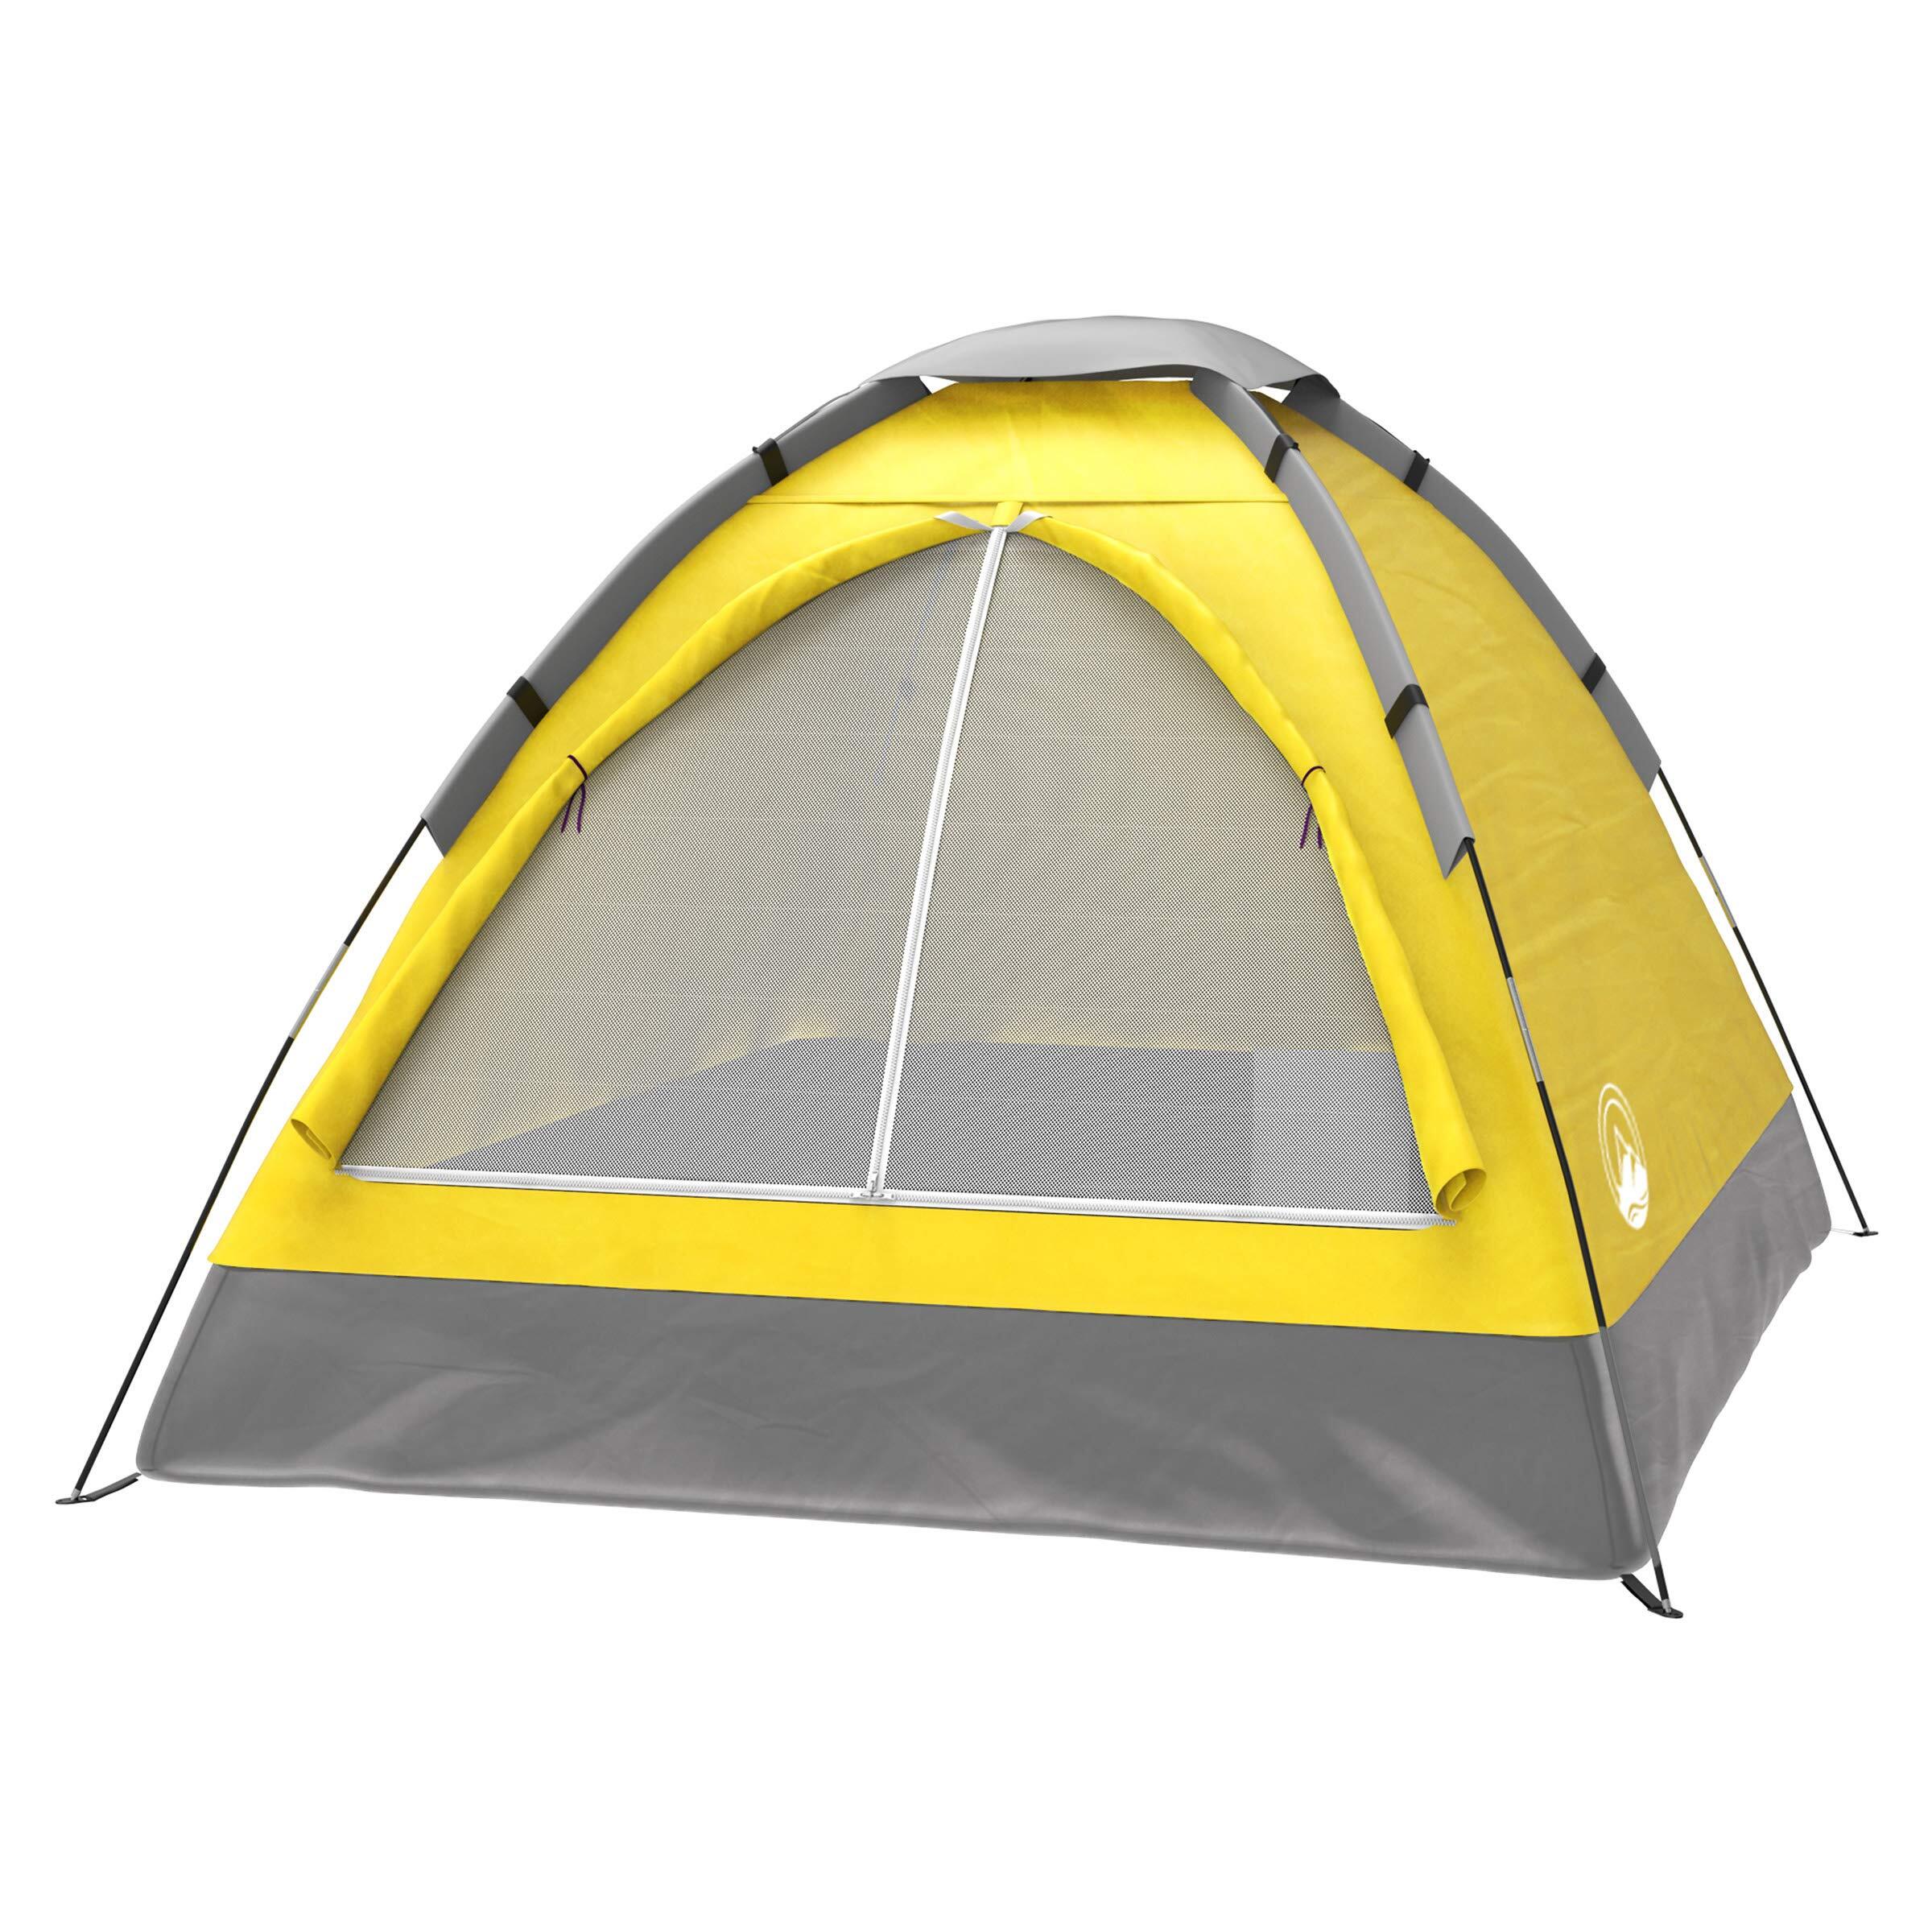 2-Person Camping Tent Includes Rain Fly and Carrying Bag